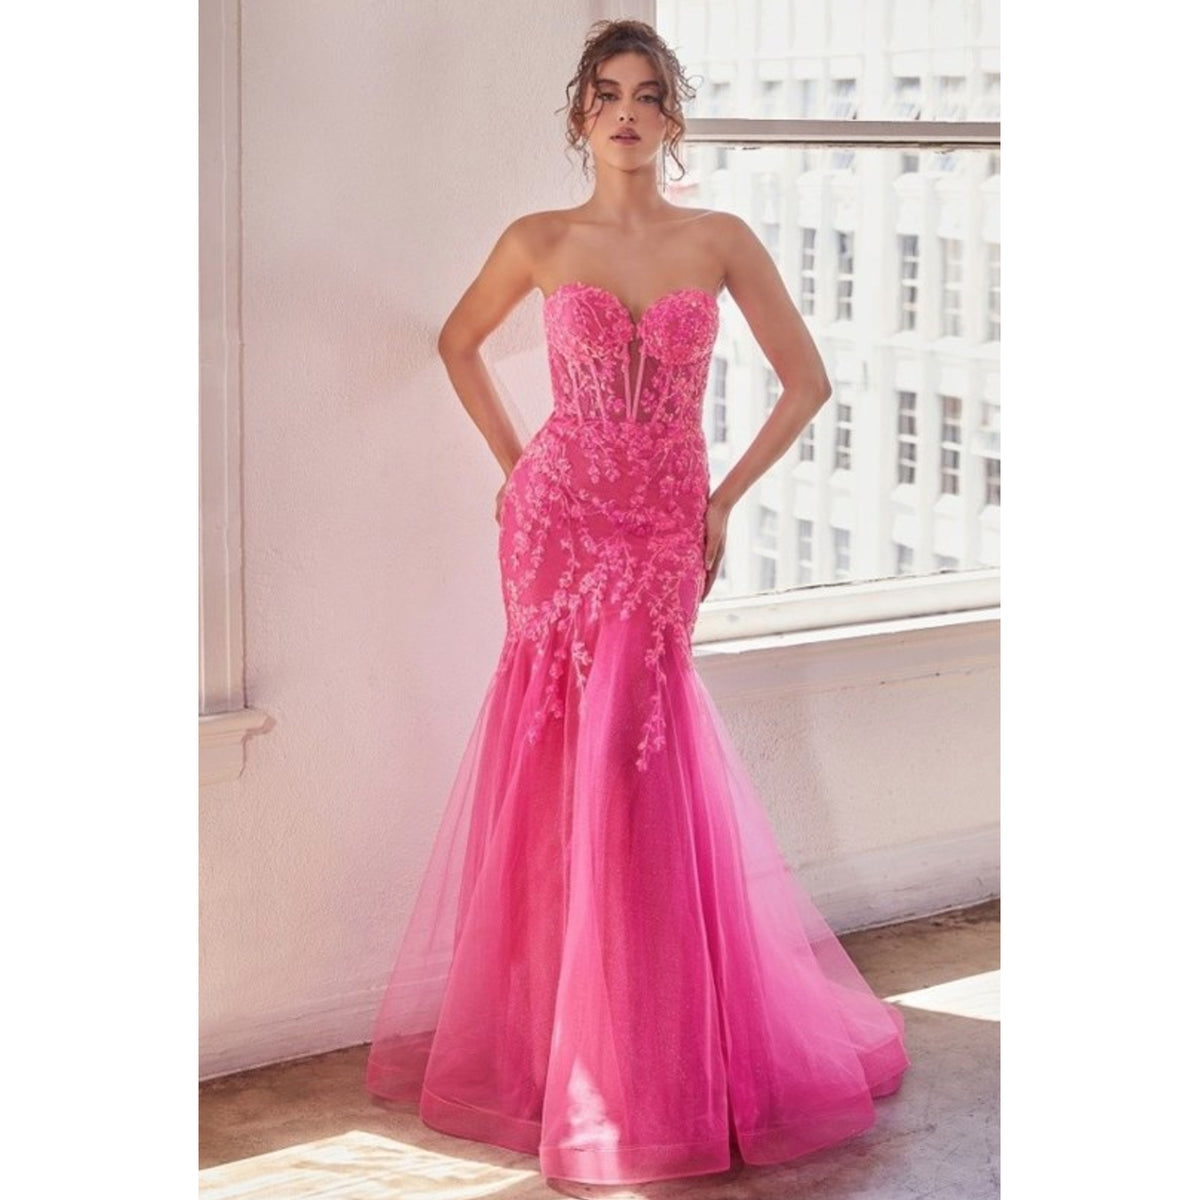 CD Strapless Embellished Mermaid Gown in Hot Pink